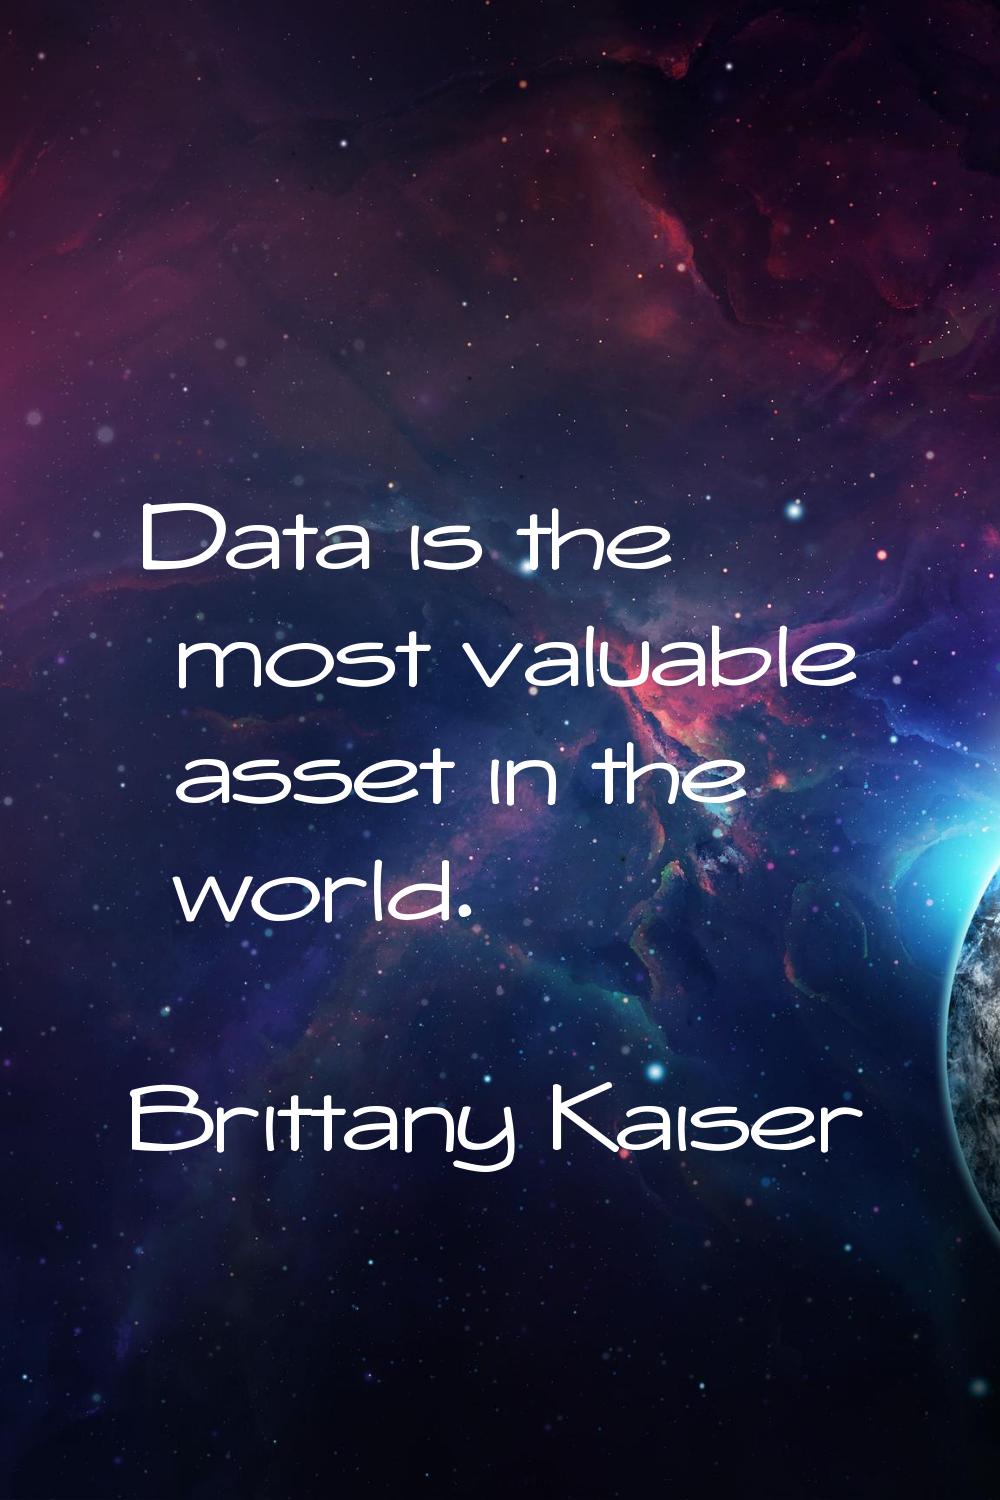 Data is the most valuable asset in the world.